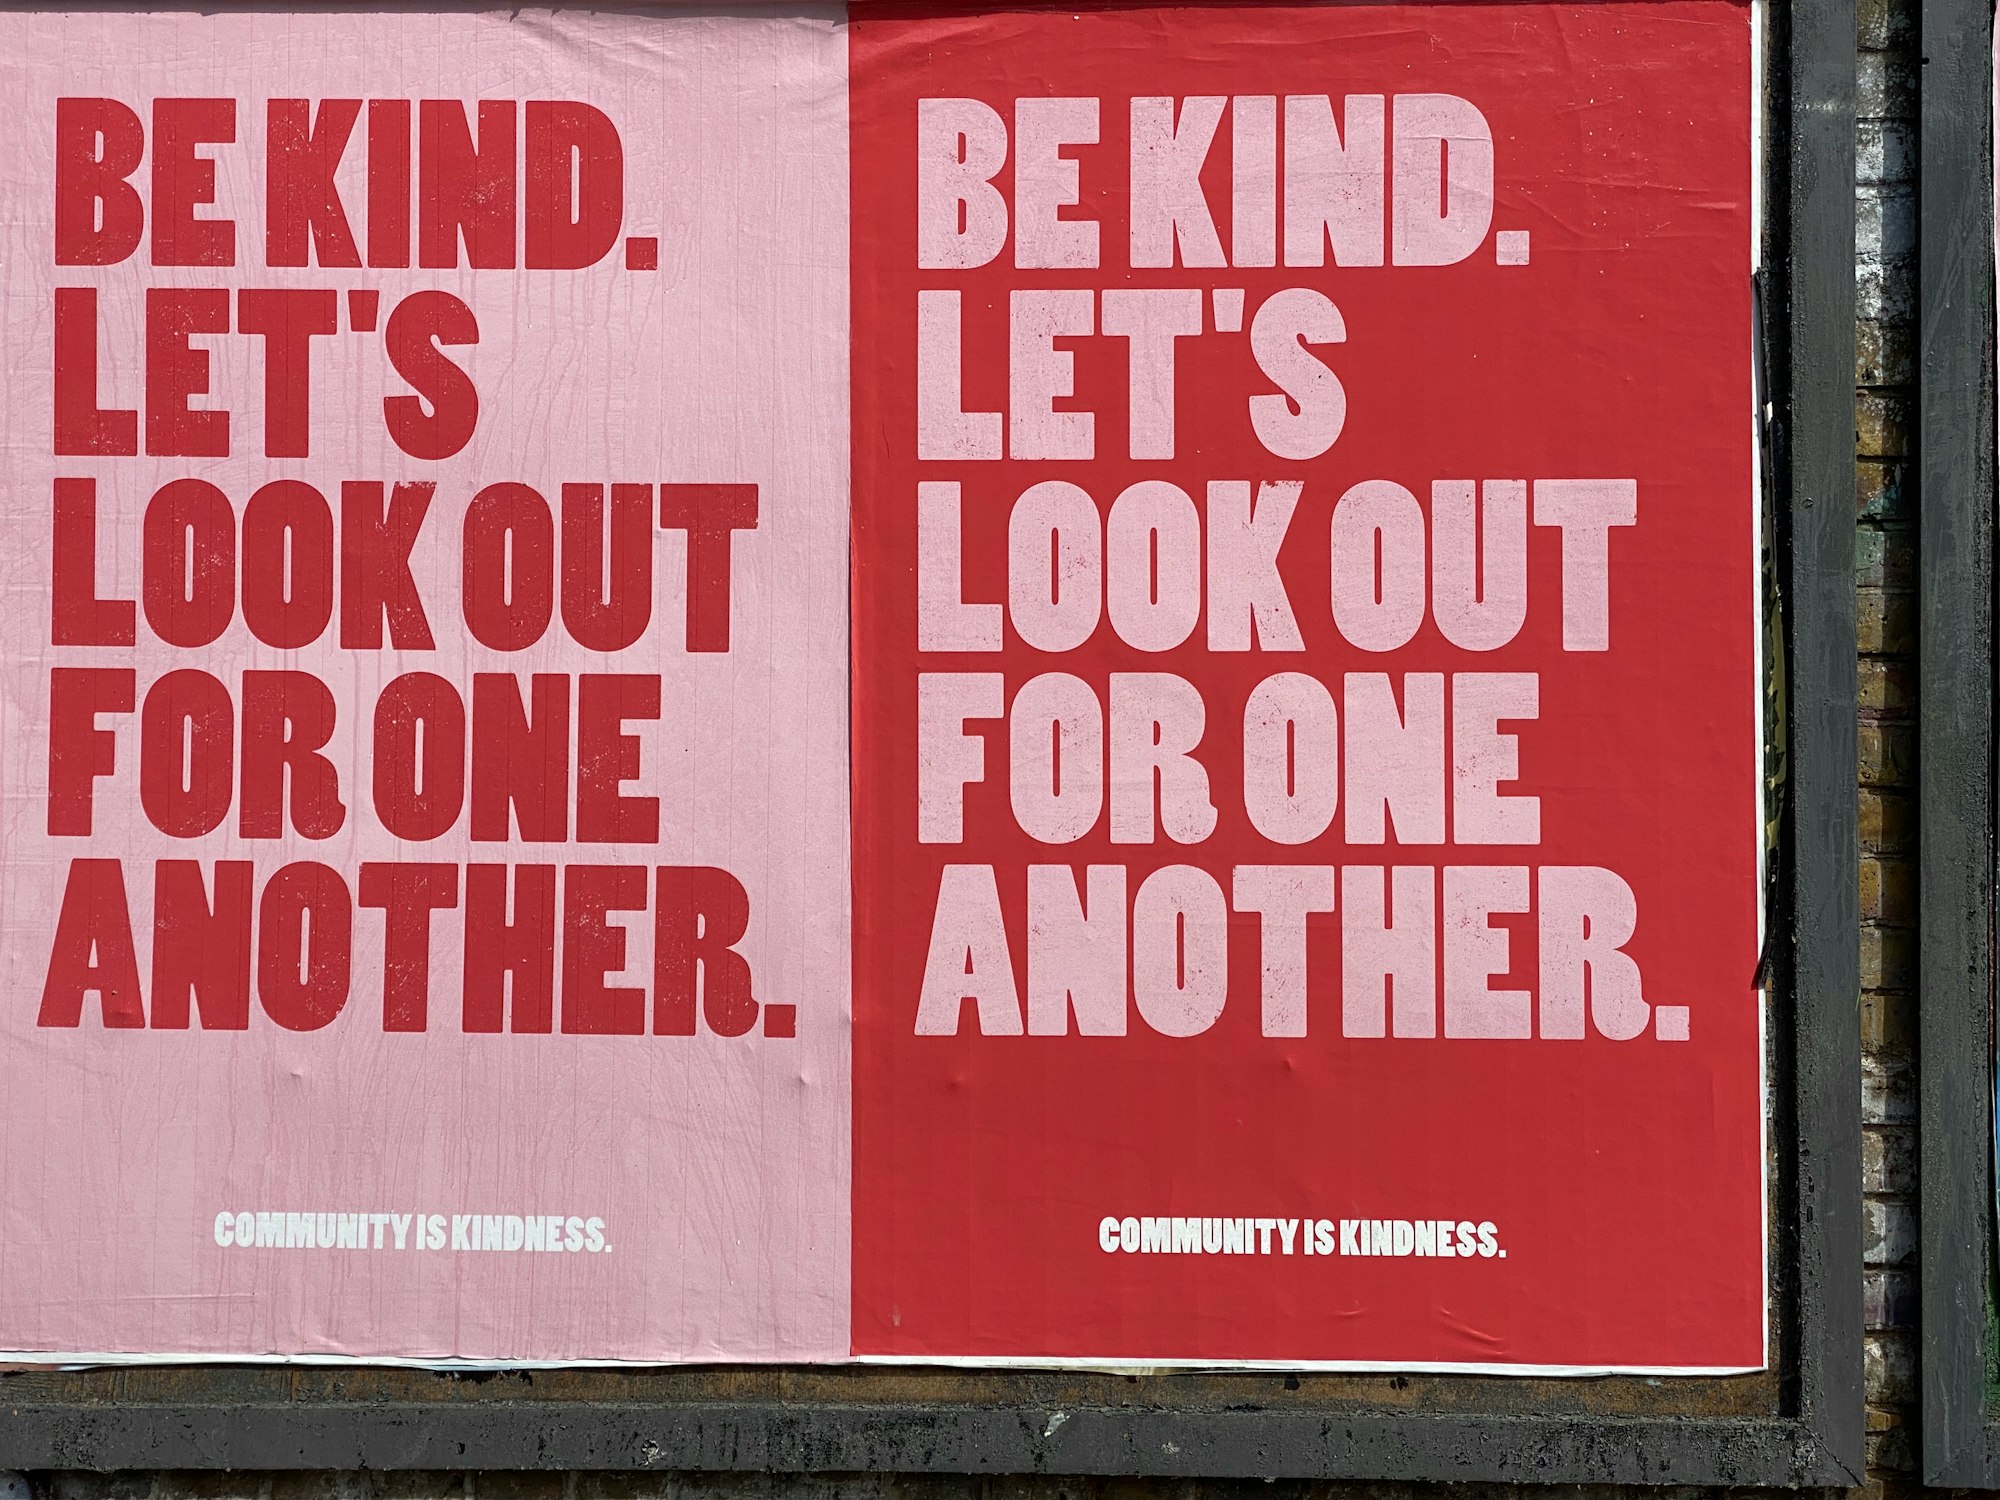 IMAGE: Posters in Brick Lane, east London, encouraging community spirit. They read "Be kind. Let's look out for one another". 